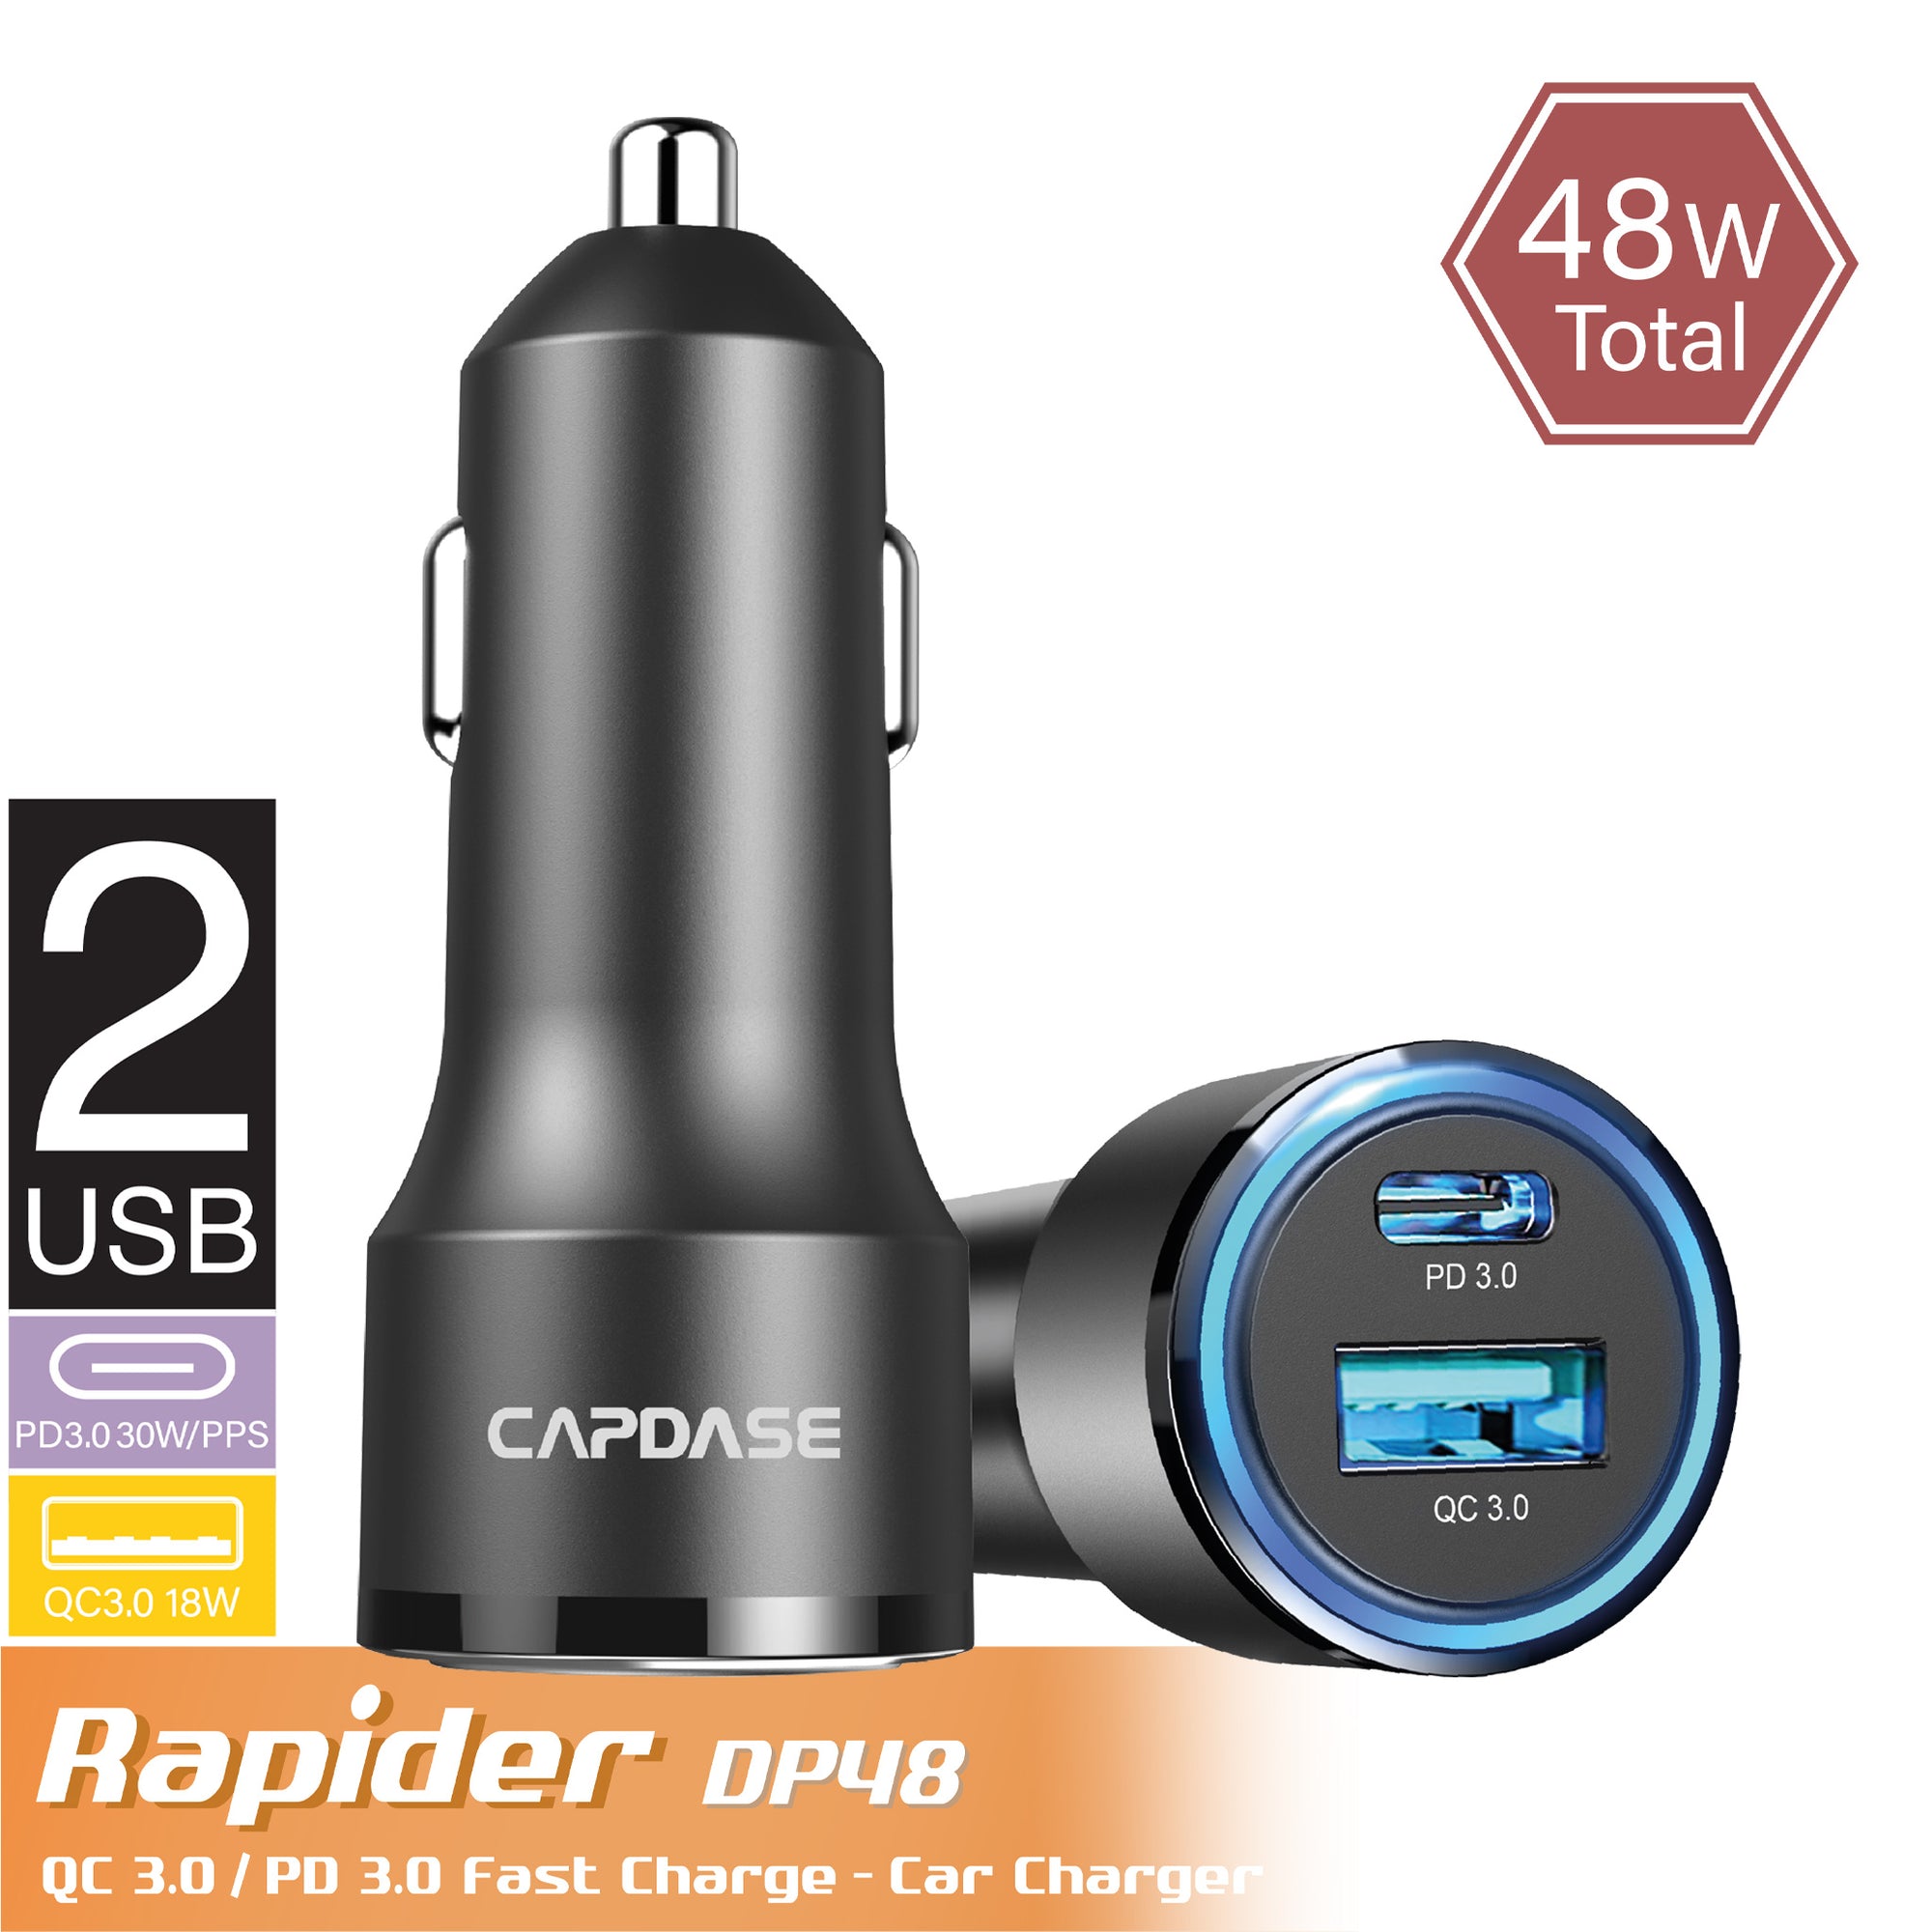 Rapider SuperDP48 QC 3.0 / PD 3.0 - 48W Car Charger